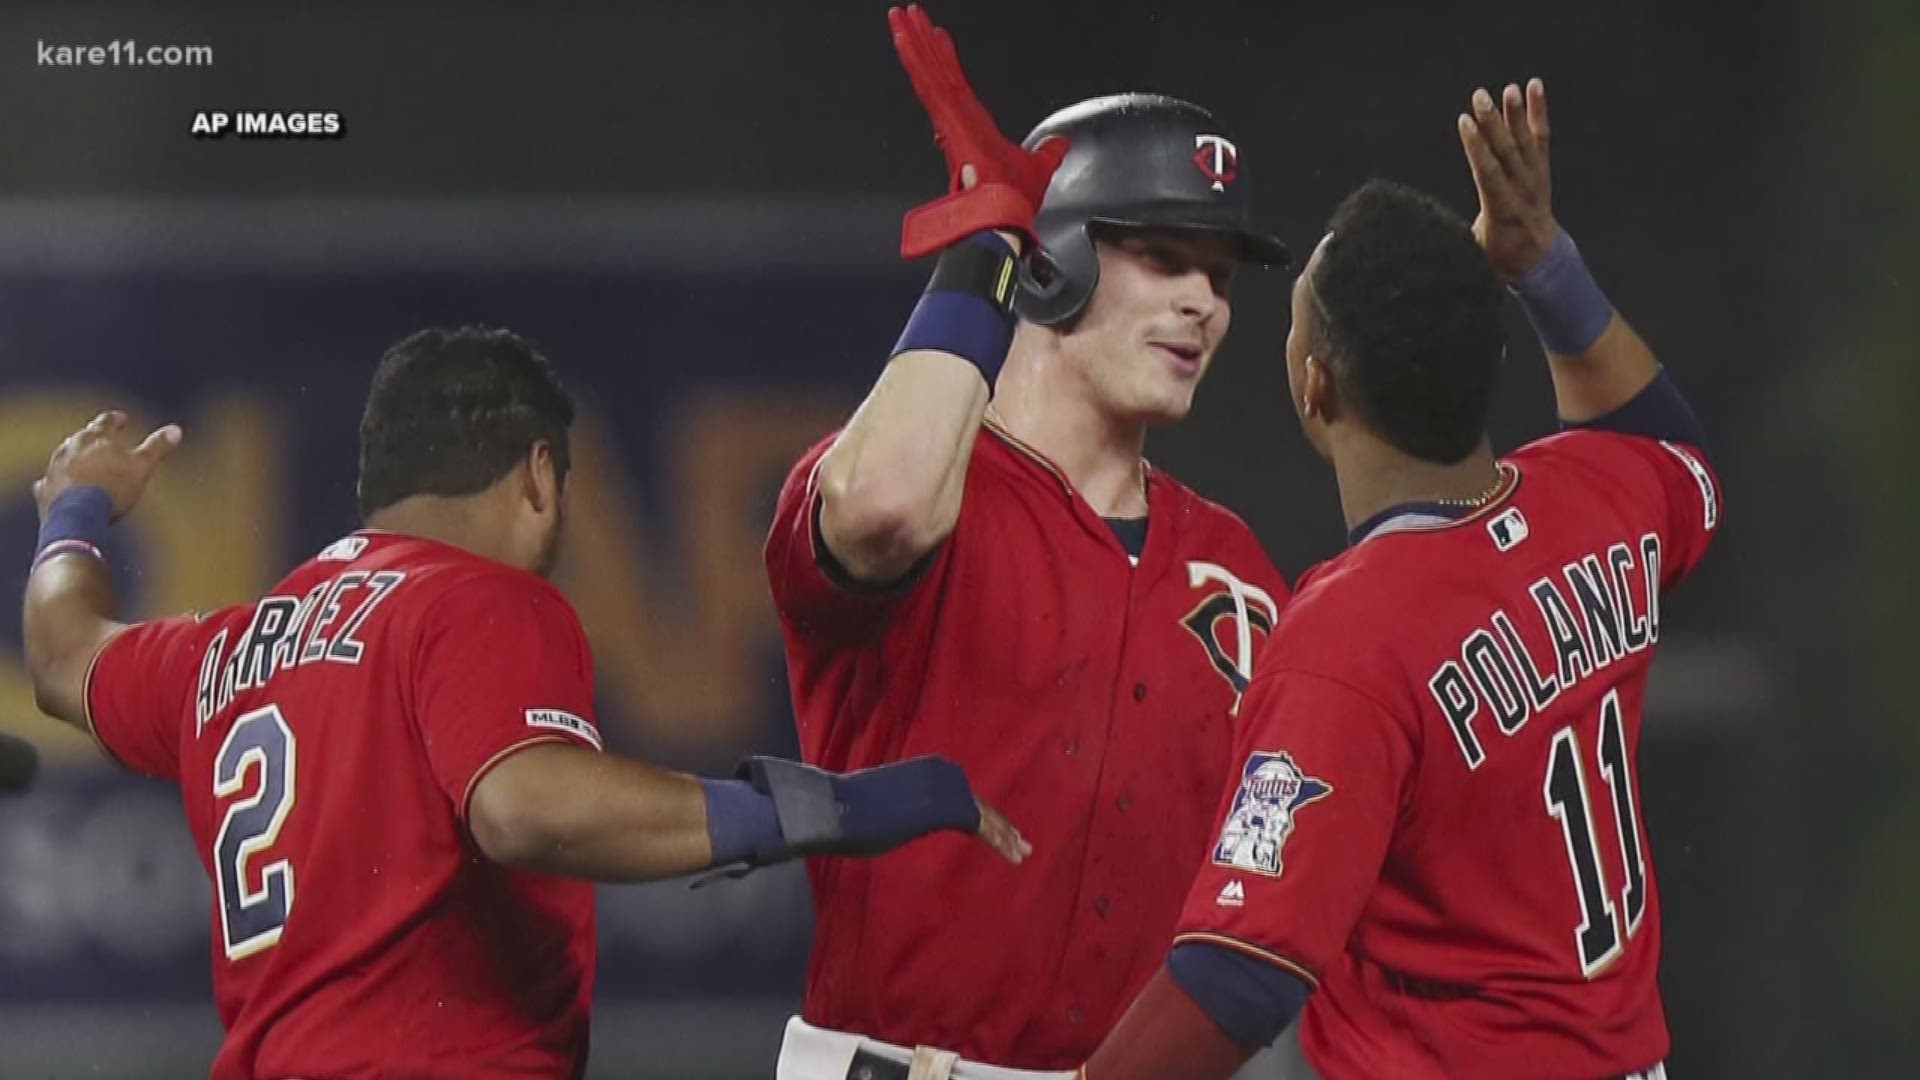 Max Kepler was supposed to have the night off. Instead, the Twins outfielder wound up playing 12 innings and delivered three huge hits.